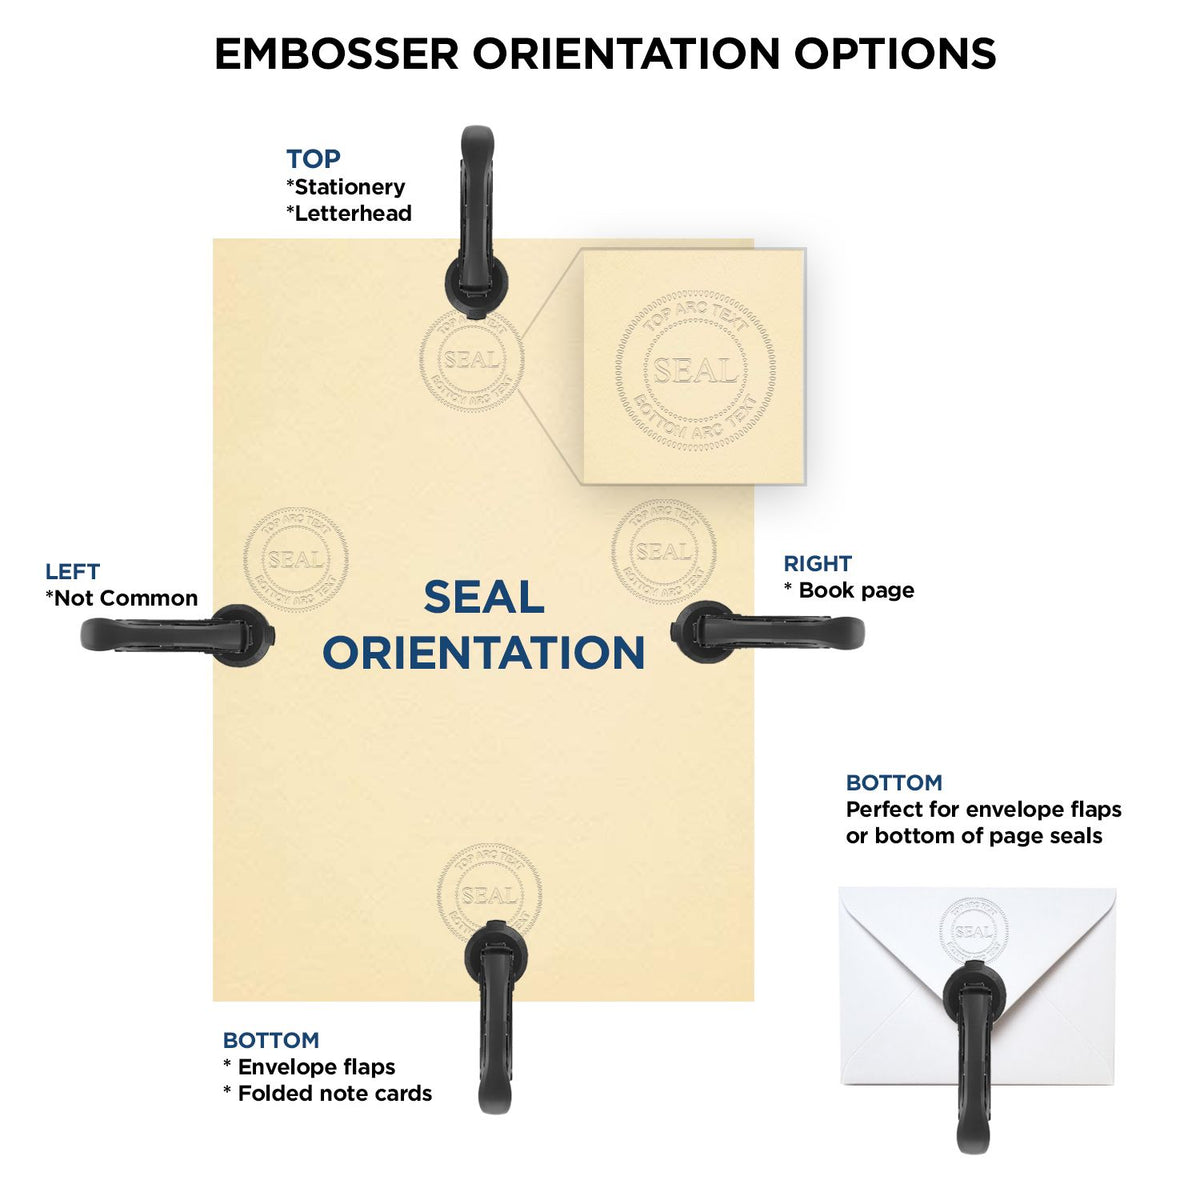 An infographic for the Gift New York Architect Seal showing embosser orientation, this is showing examples of a top, bottom, right and left insert.